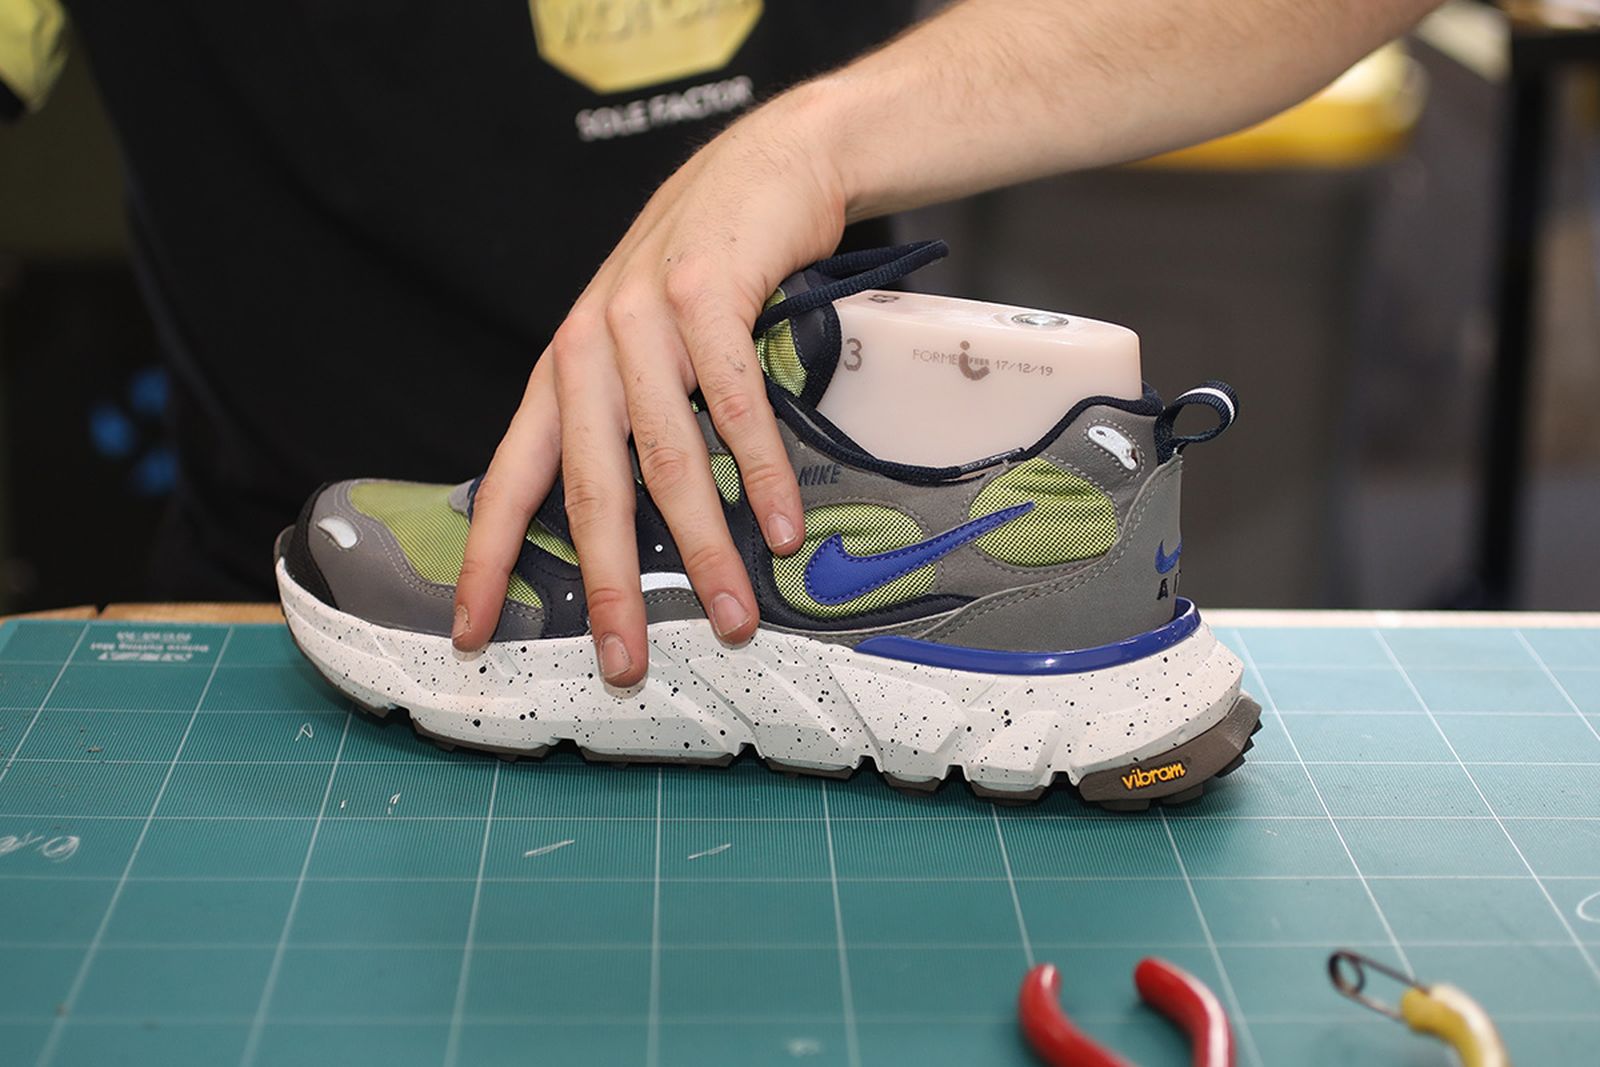 This Shoe Collector and Vibram Are Giving New Life to Old Shoes